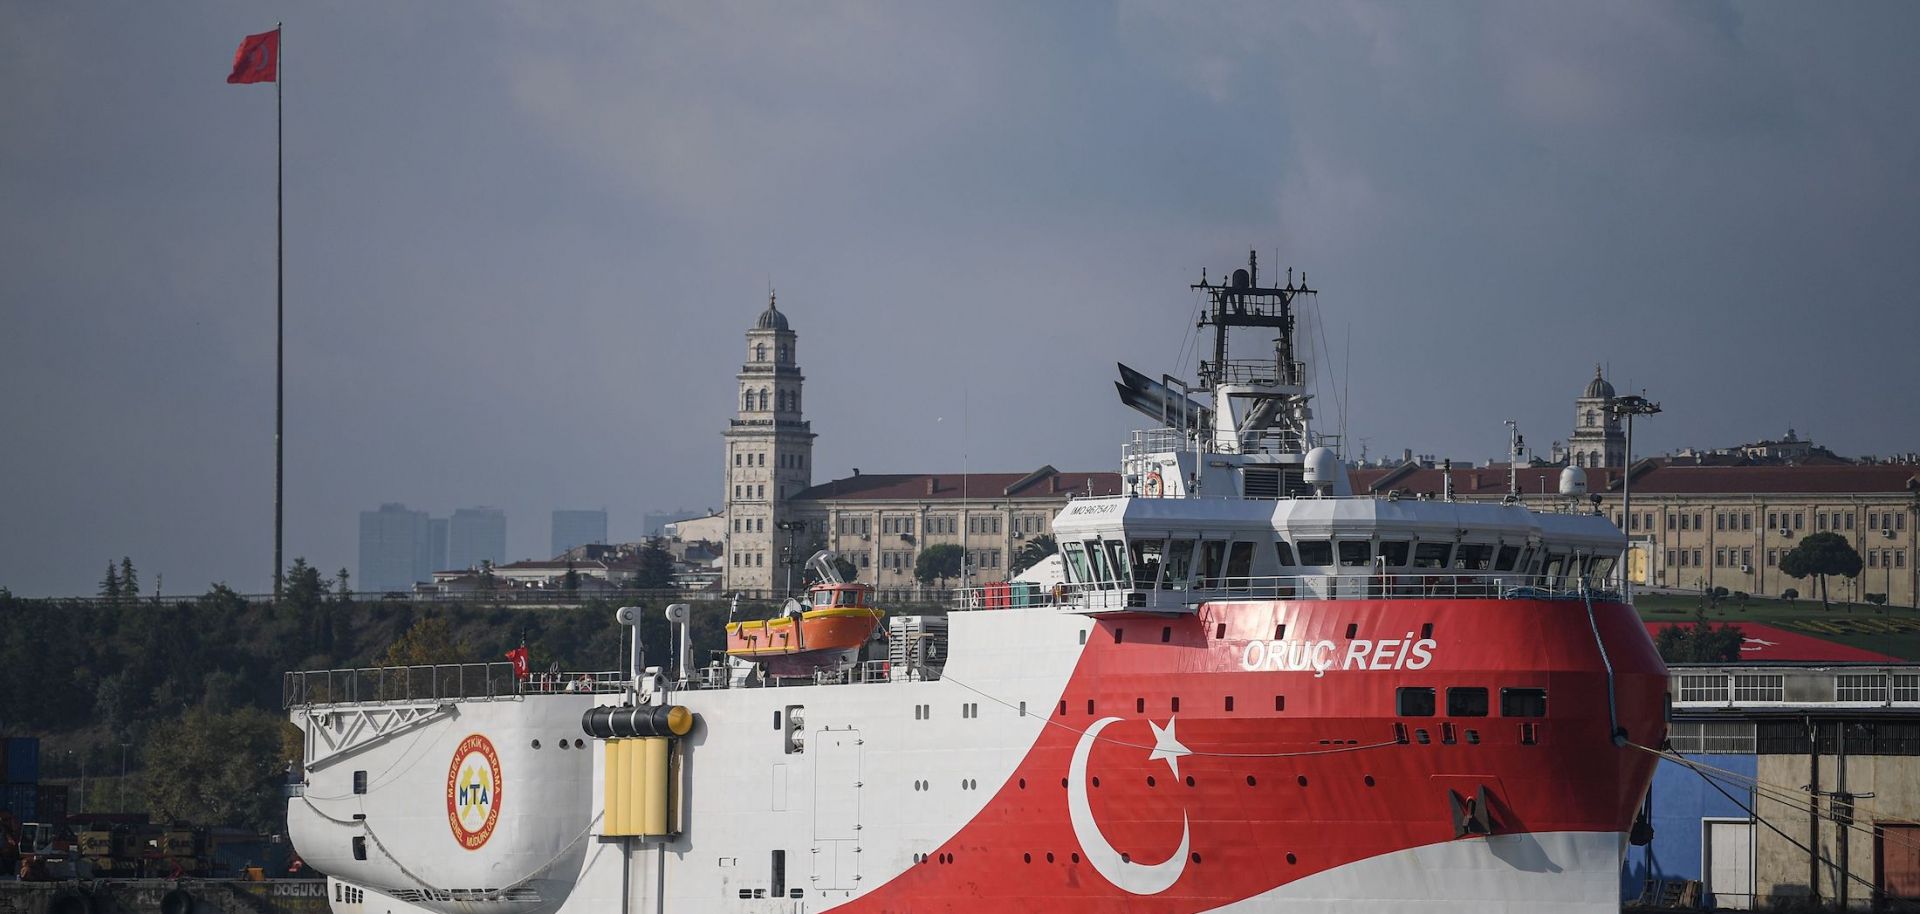 The Oruc Reis seismic research vessel on Aug. 23, 2019, in Istanbul.